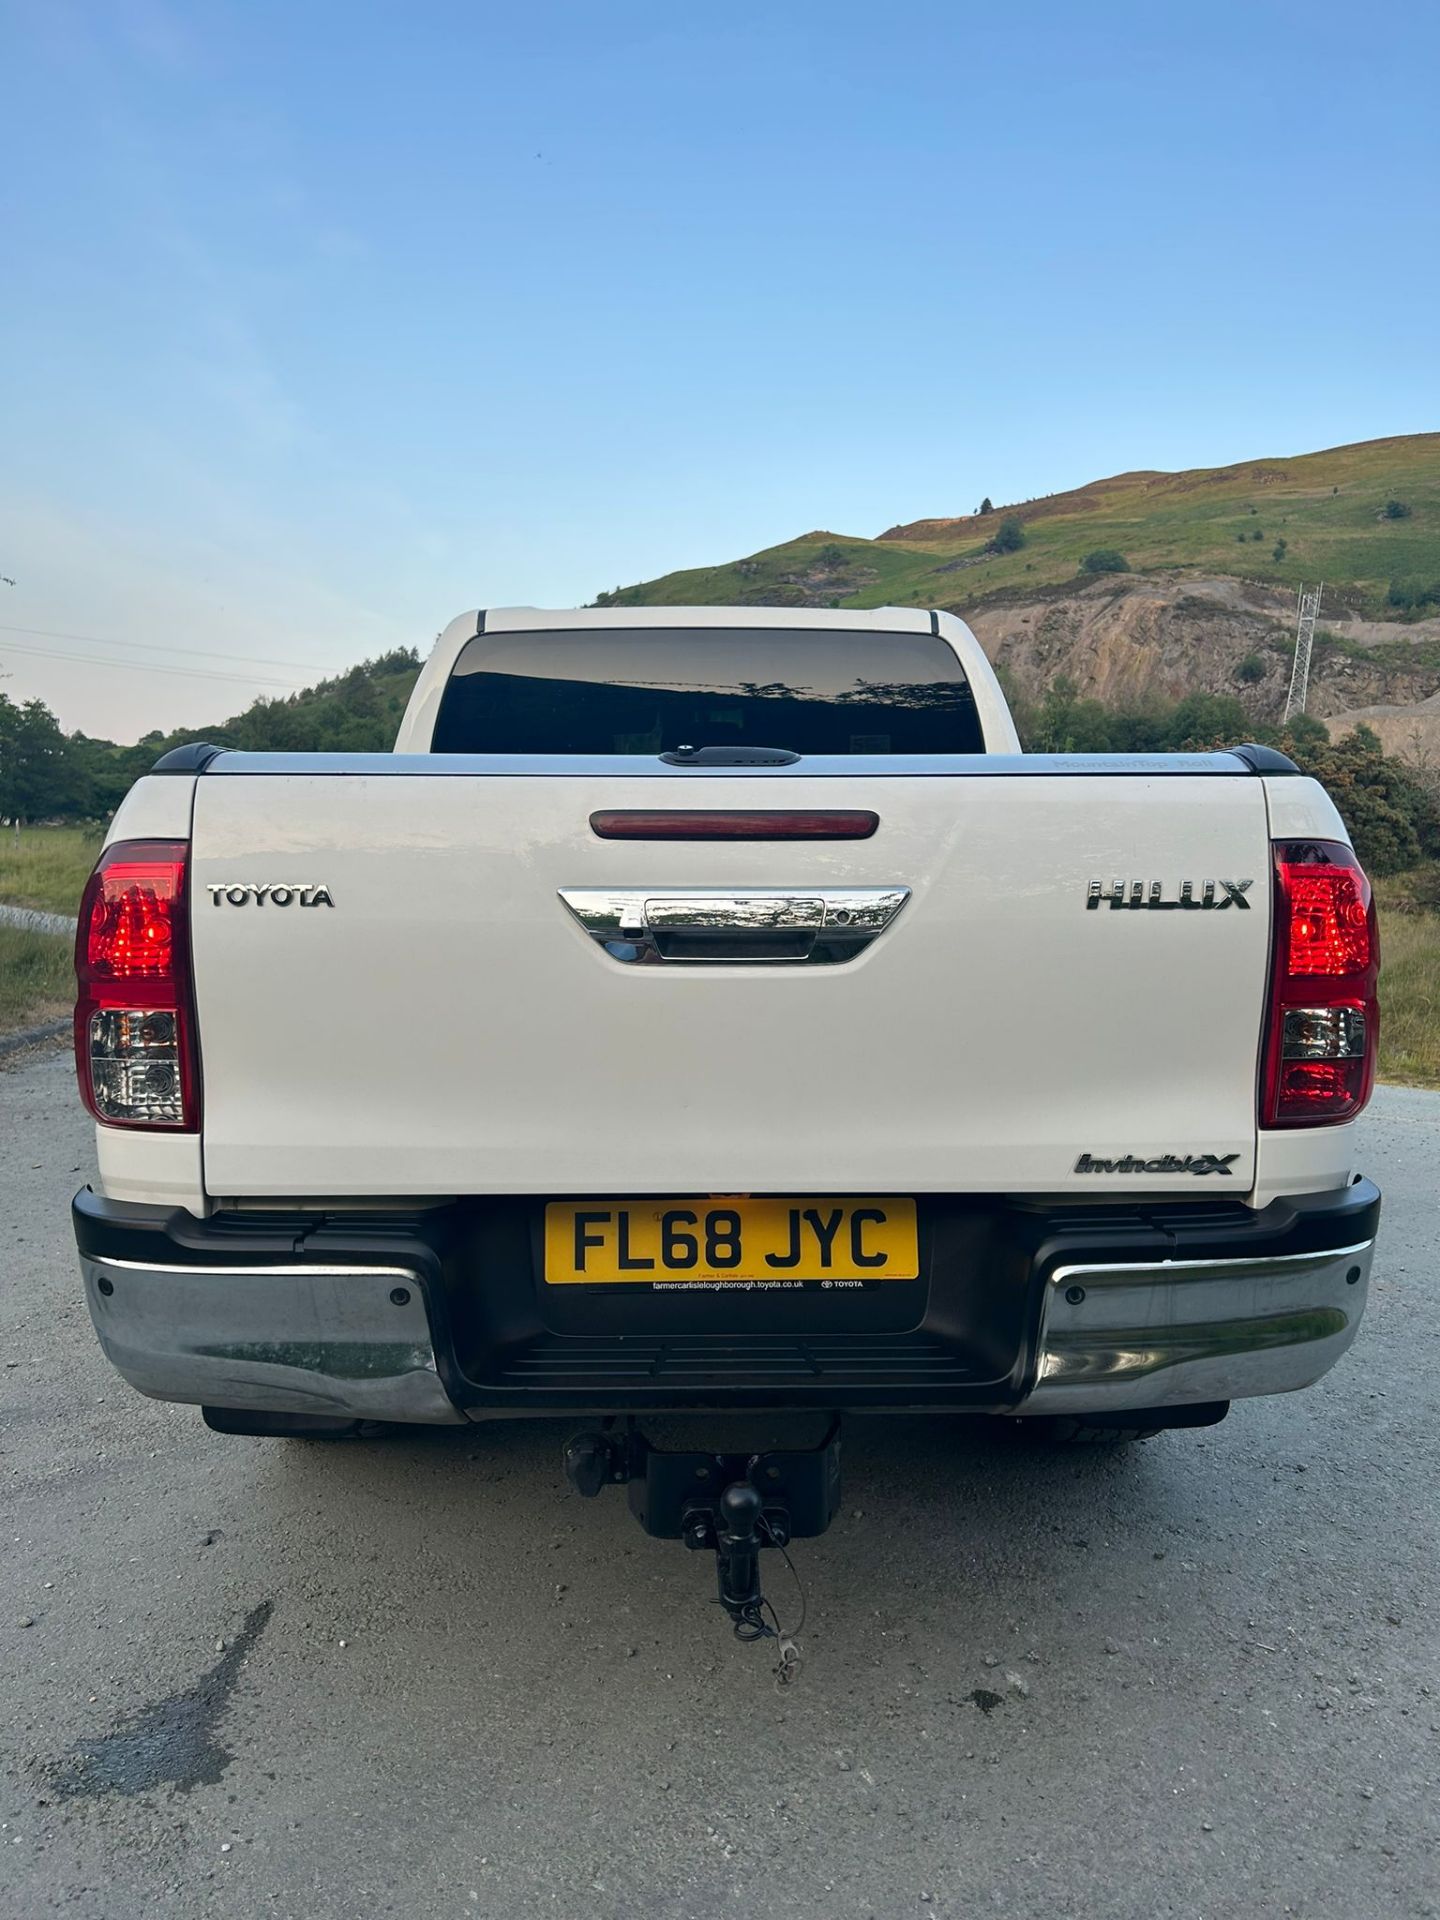 AUTOMATIC 2018 TOYOTA HILUX LIMITED EDITION FACELIFT ROLLER SHUTTER - Image 7 of 18